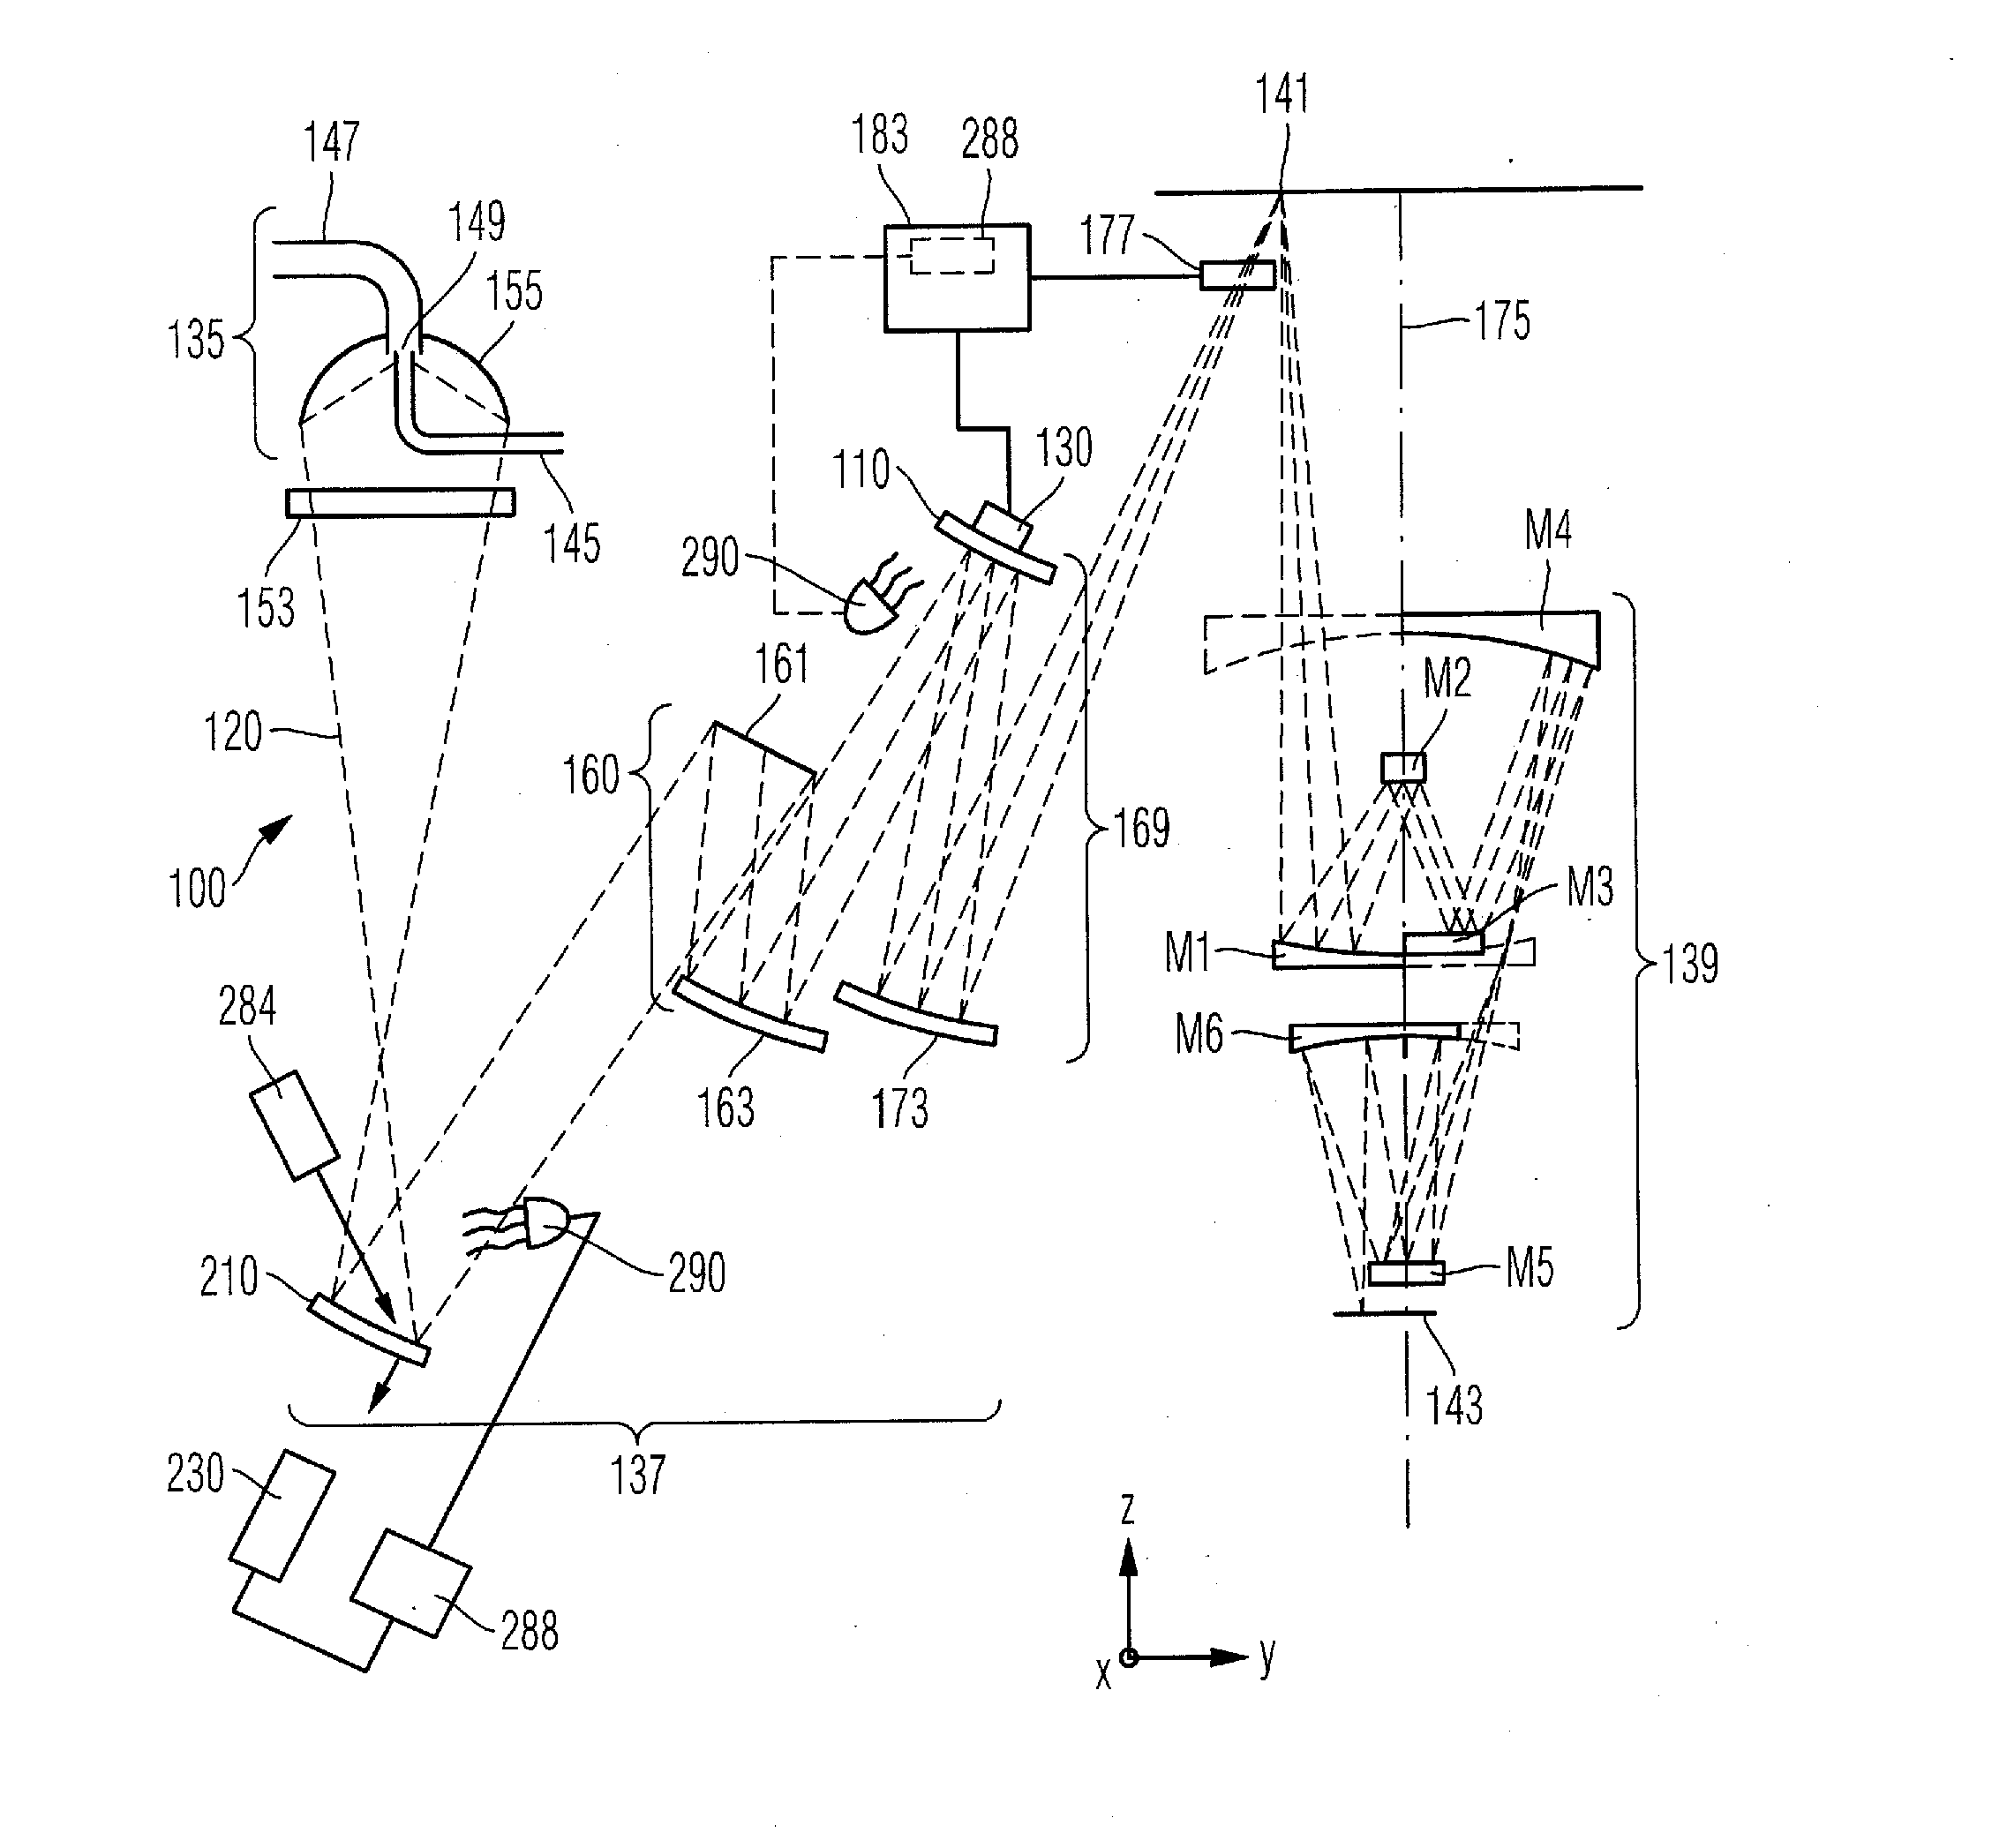 Arrangement for use in a projection exposure tool for microlithography having a reflective optical element